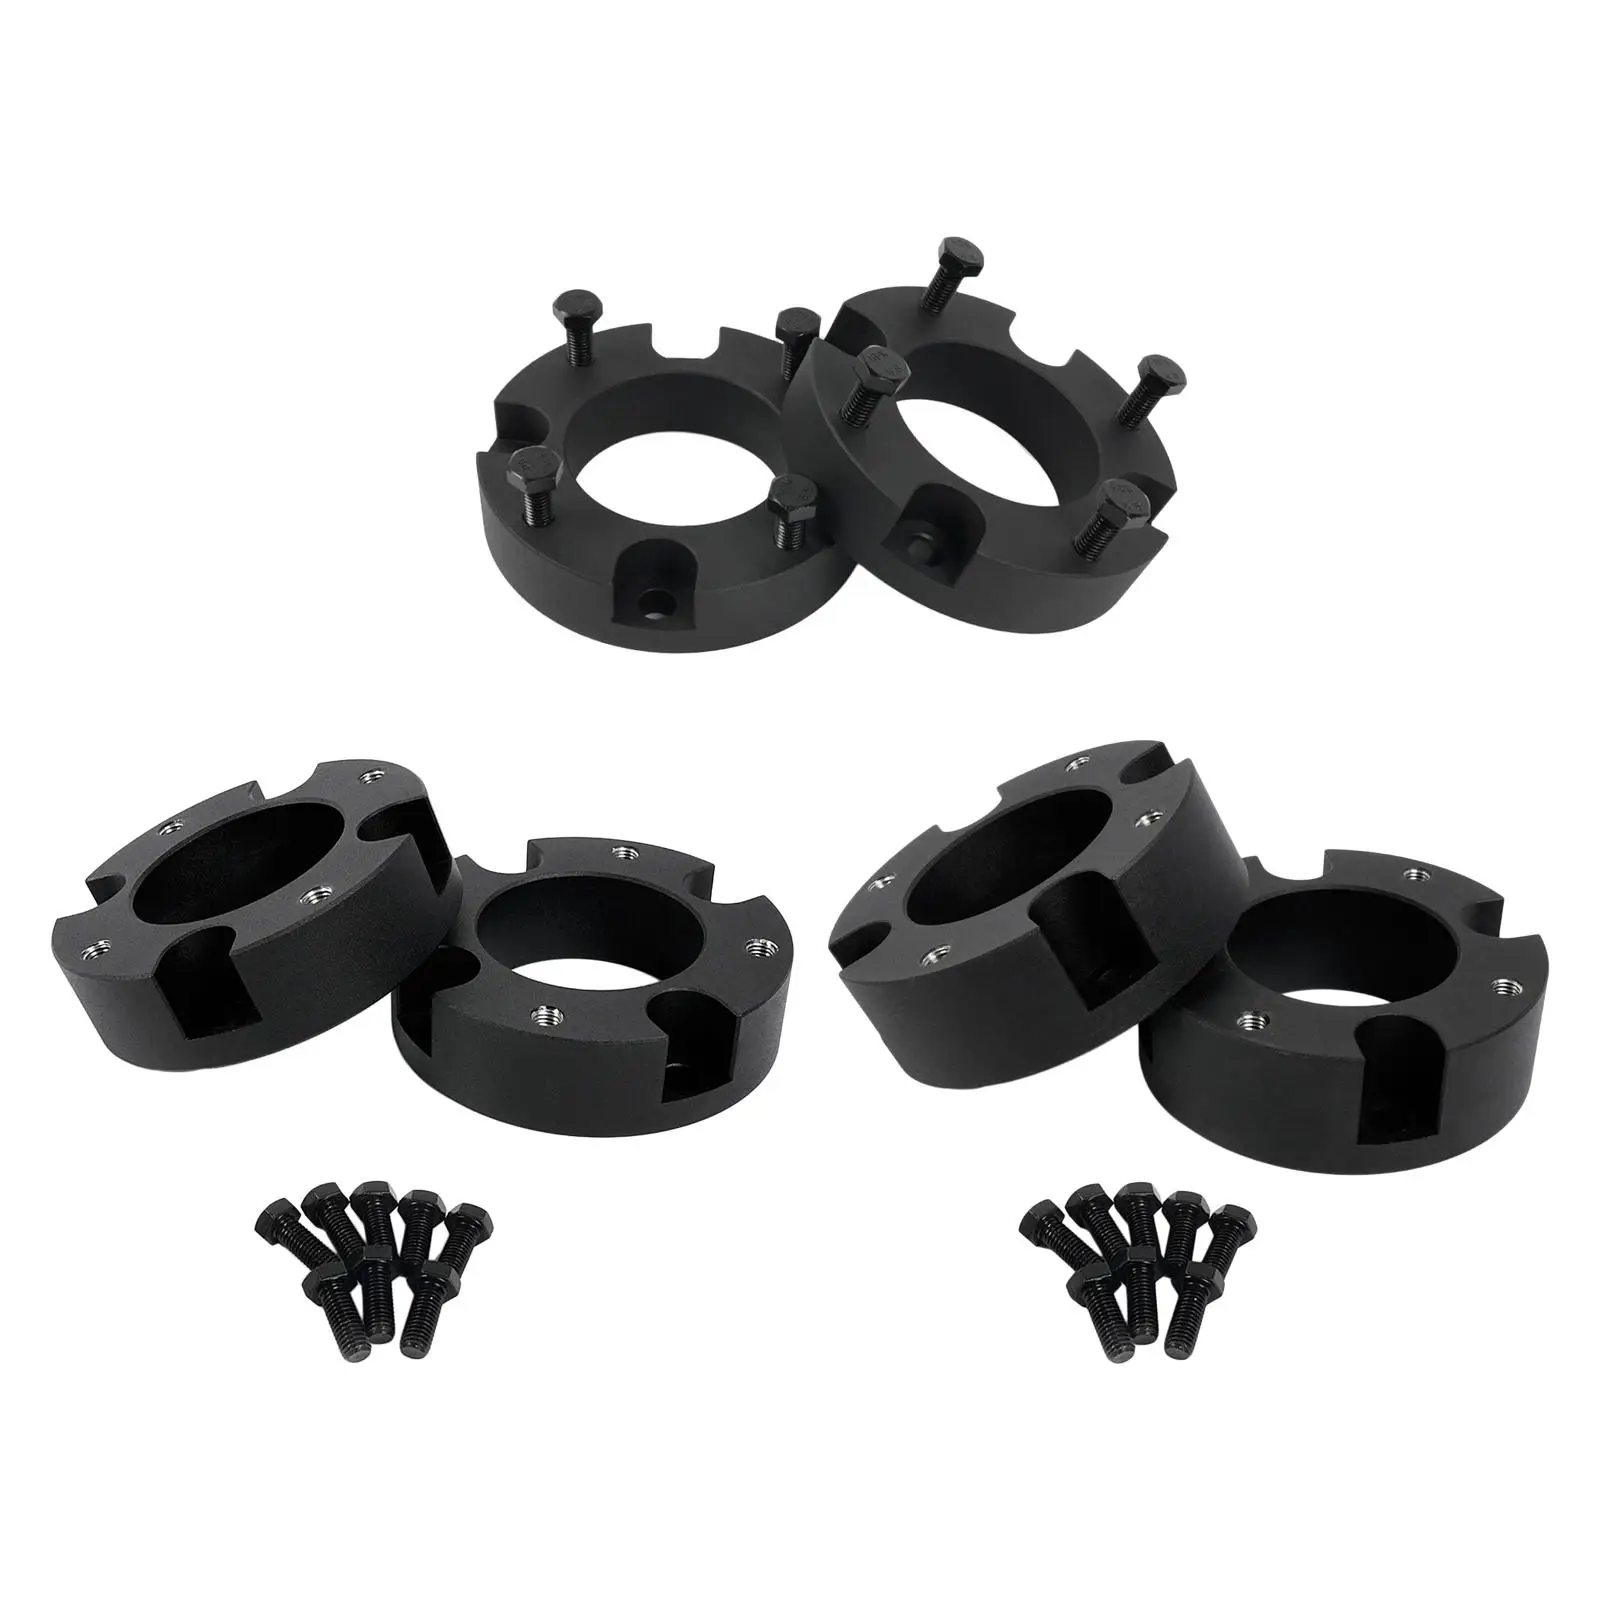 Black Leveling Lift Set Replaces Billet Wheel Spacers for Toyota for tundra